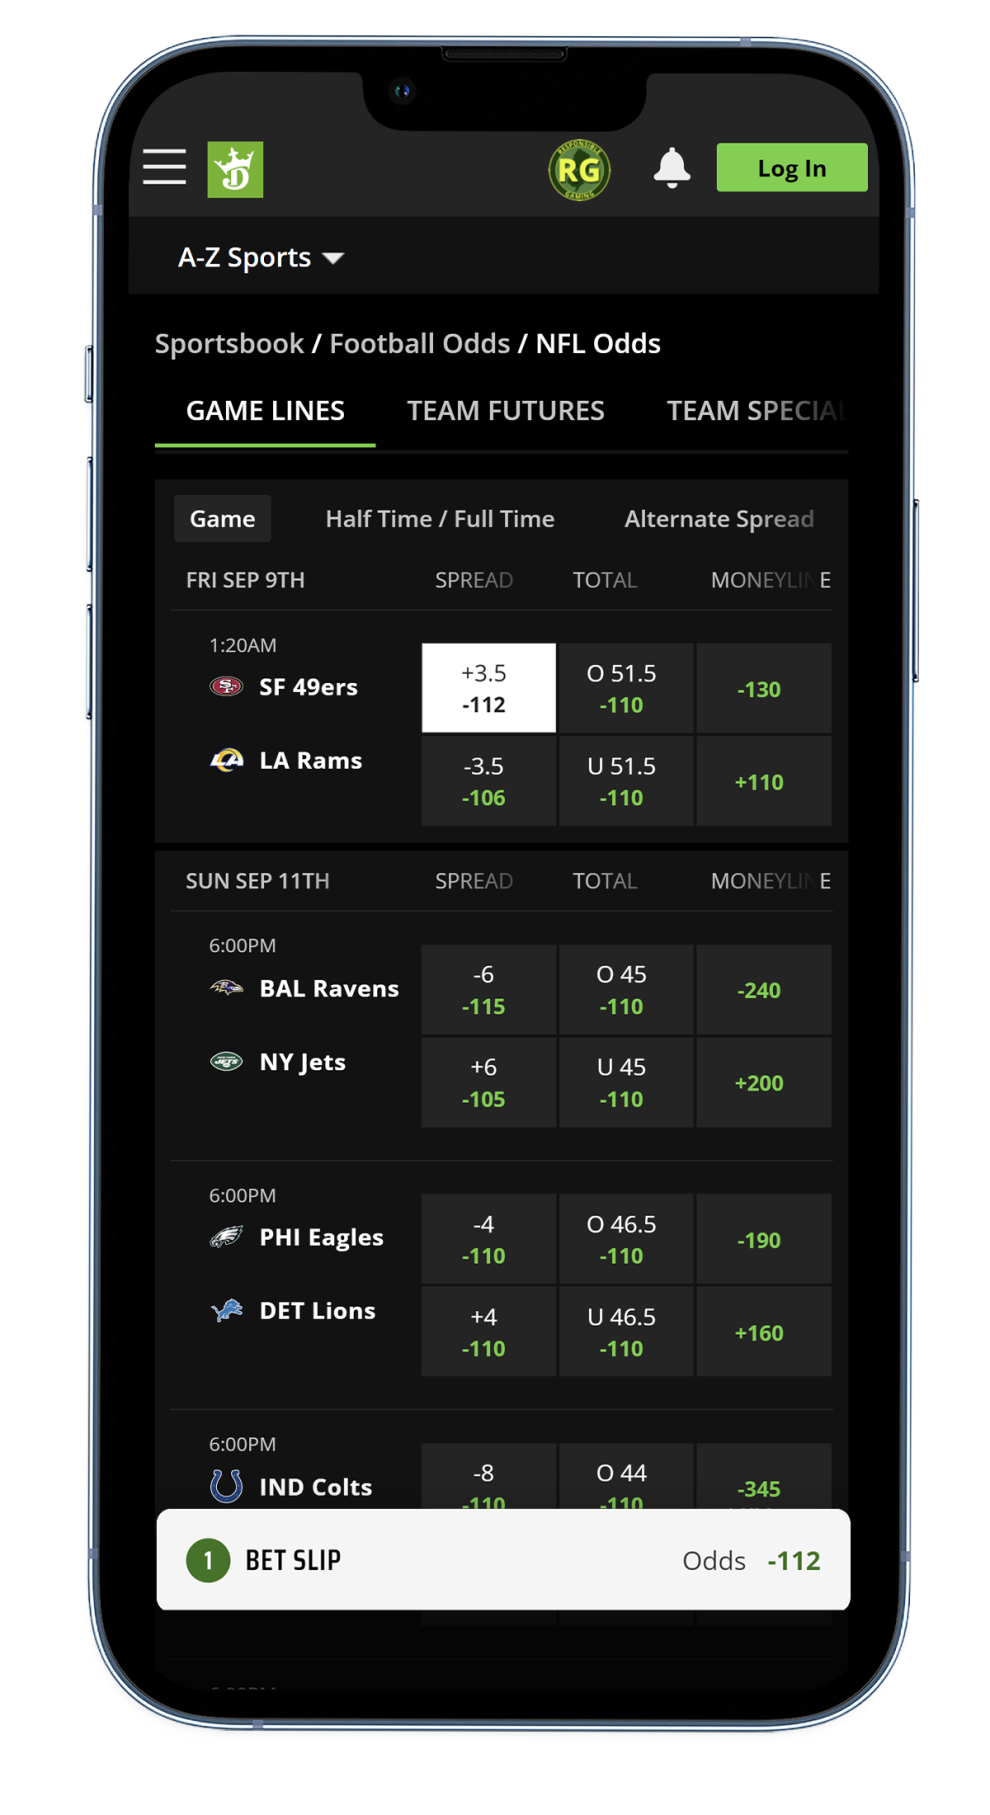 NFL Point Spread Betting Guide - Understand NFL Spread Bets